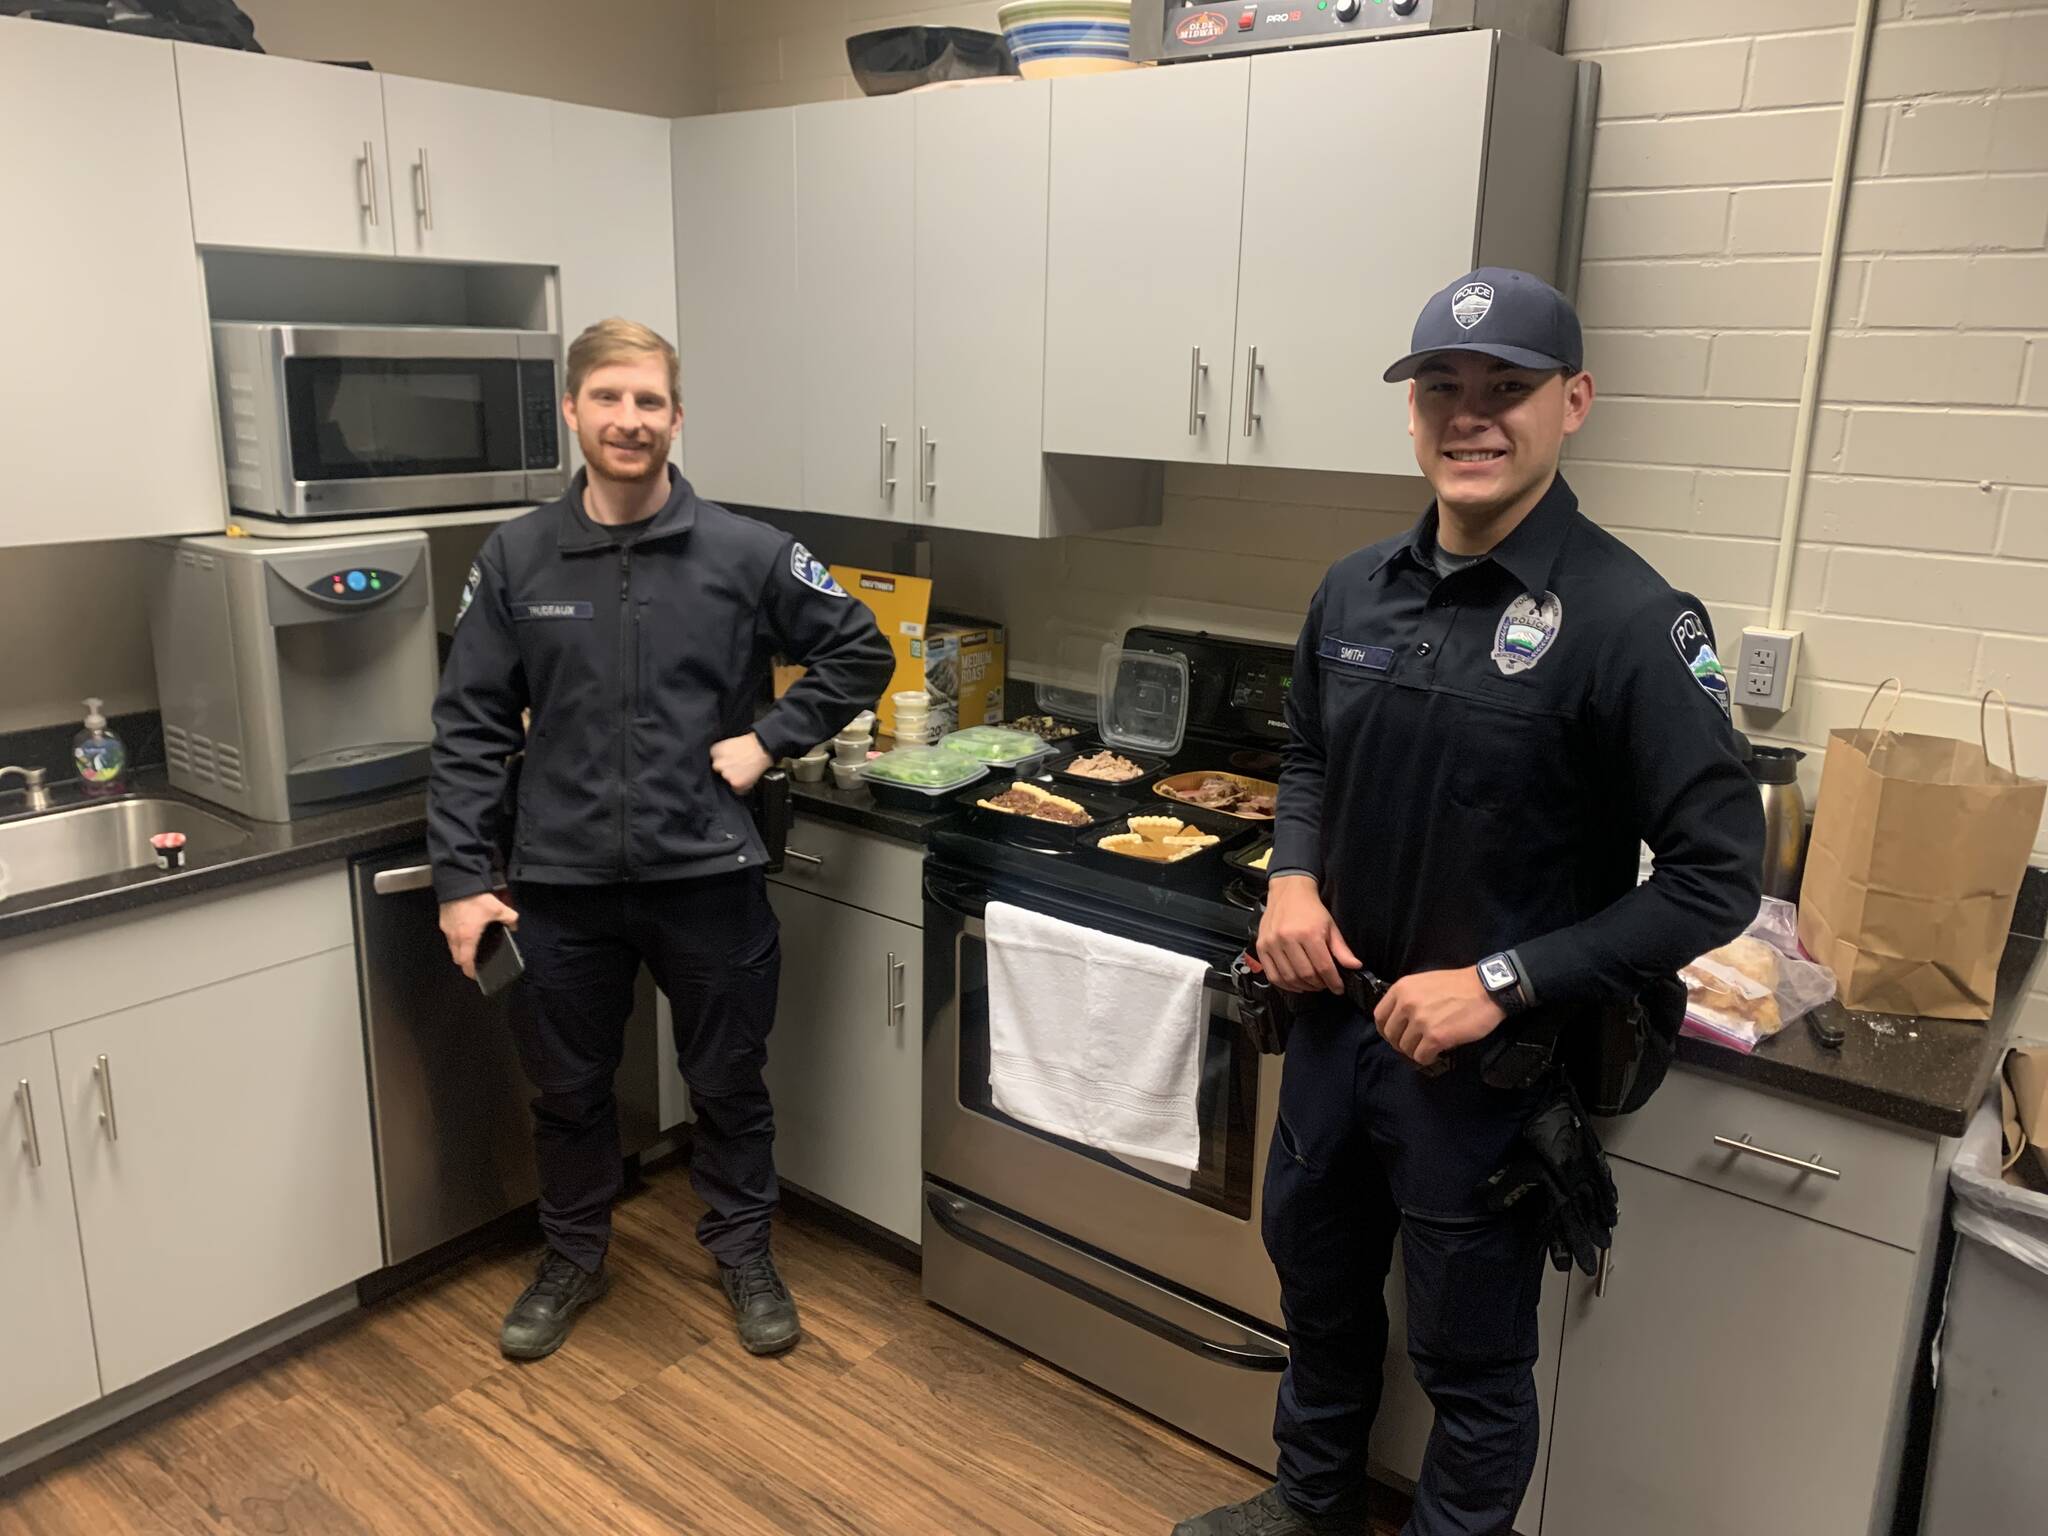 A group of Mercer Island residents showed its appreciation for the Mercer Island Police Department by delivering a Thanksgiving meal to the station last week. Pictured are officers Sam Trudeaux, left, and Chris Smith. Courtesy photo